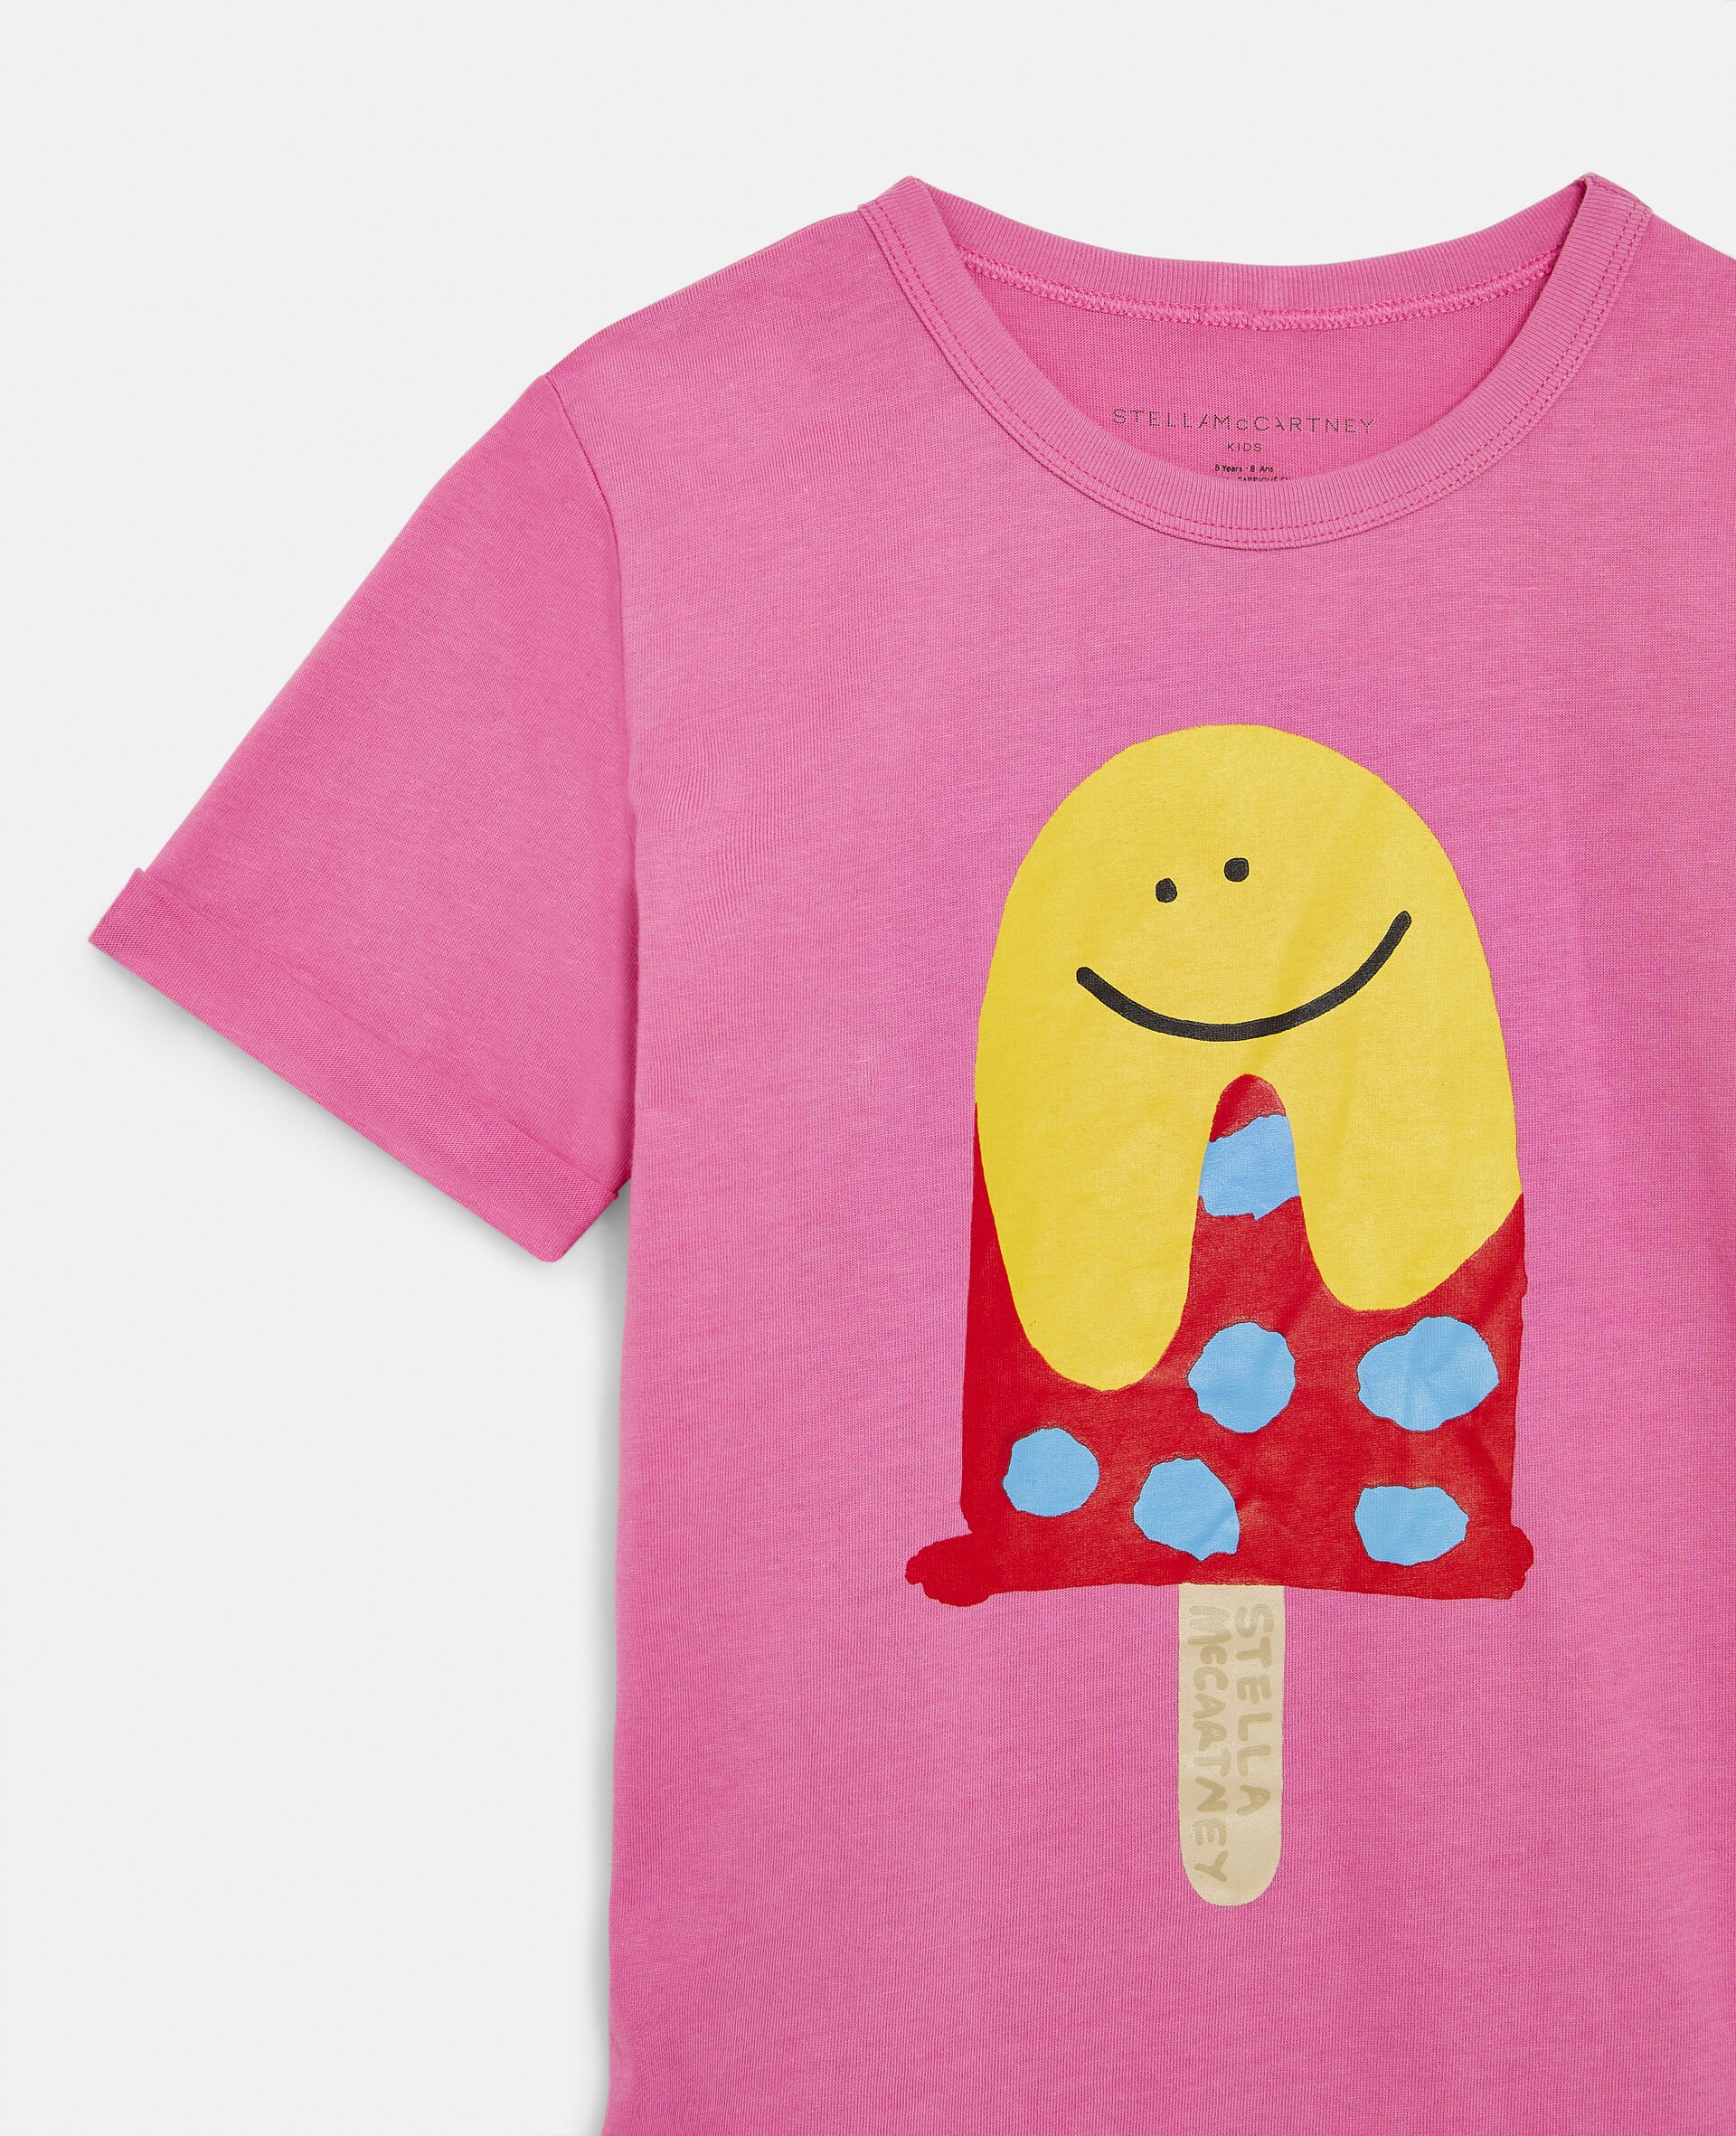 Popsicle Print Cotton T-Shirt-Pink-large image number 1